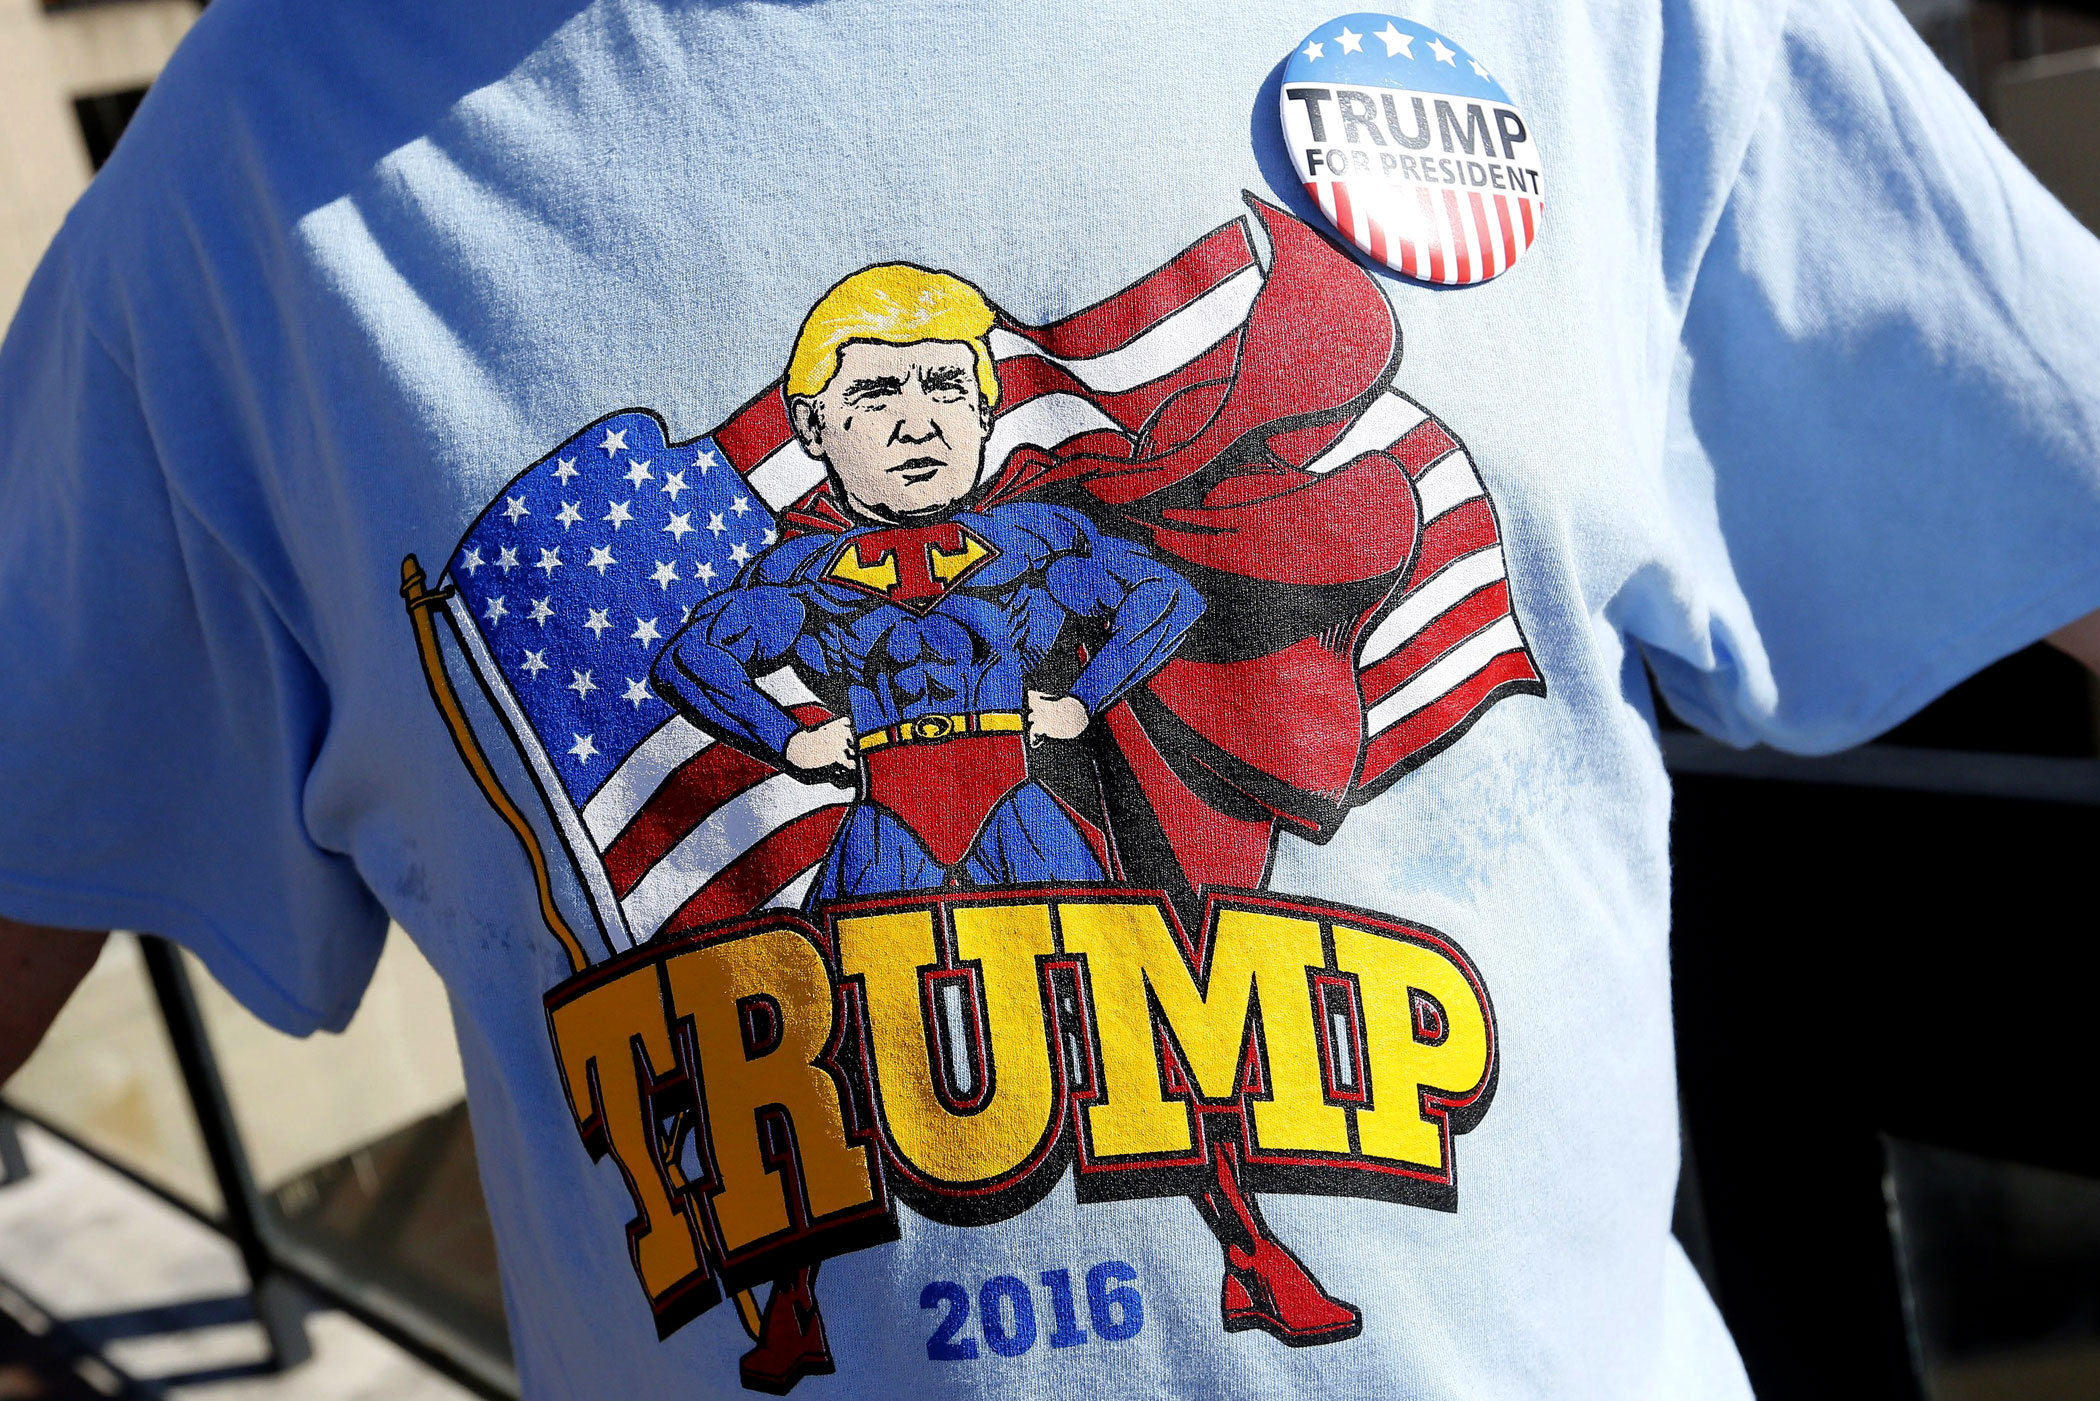 A supporter of Republican presidential candidate Donald Trump attends a rally in Baton Rouge, La. on Feb. 11.